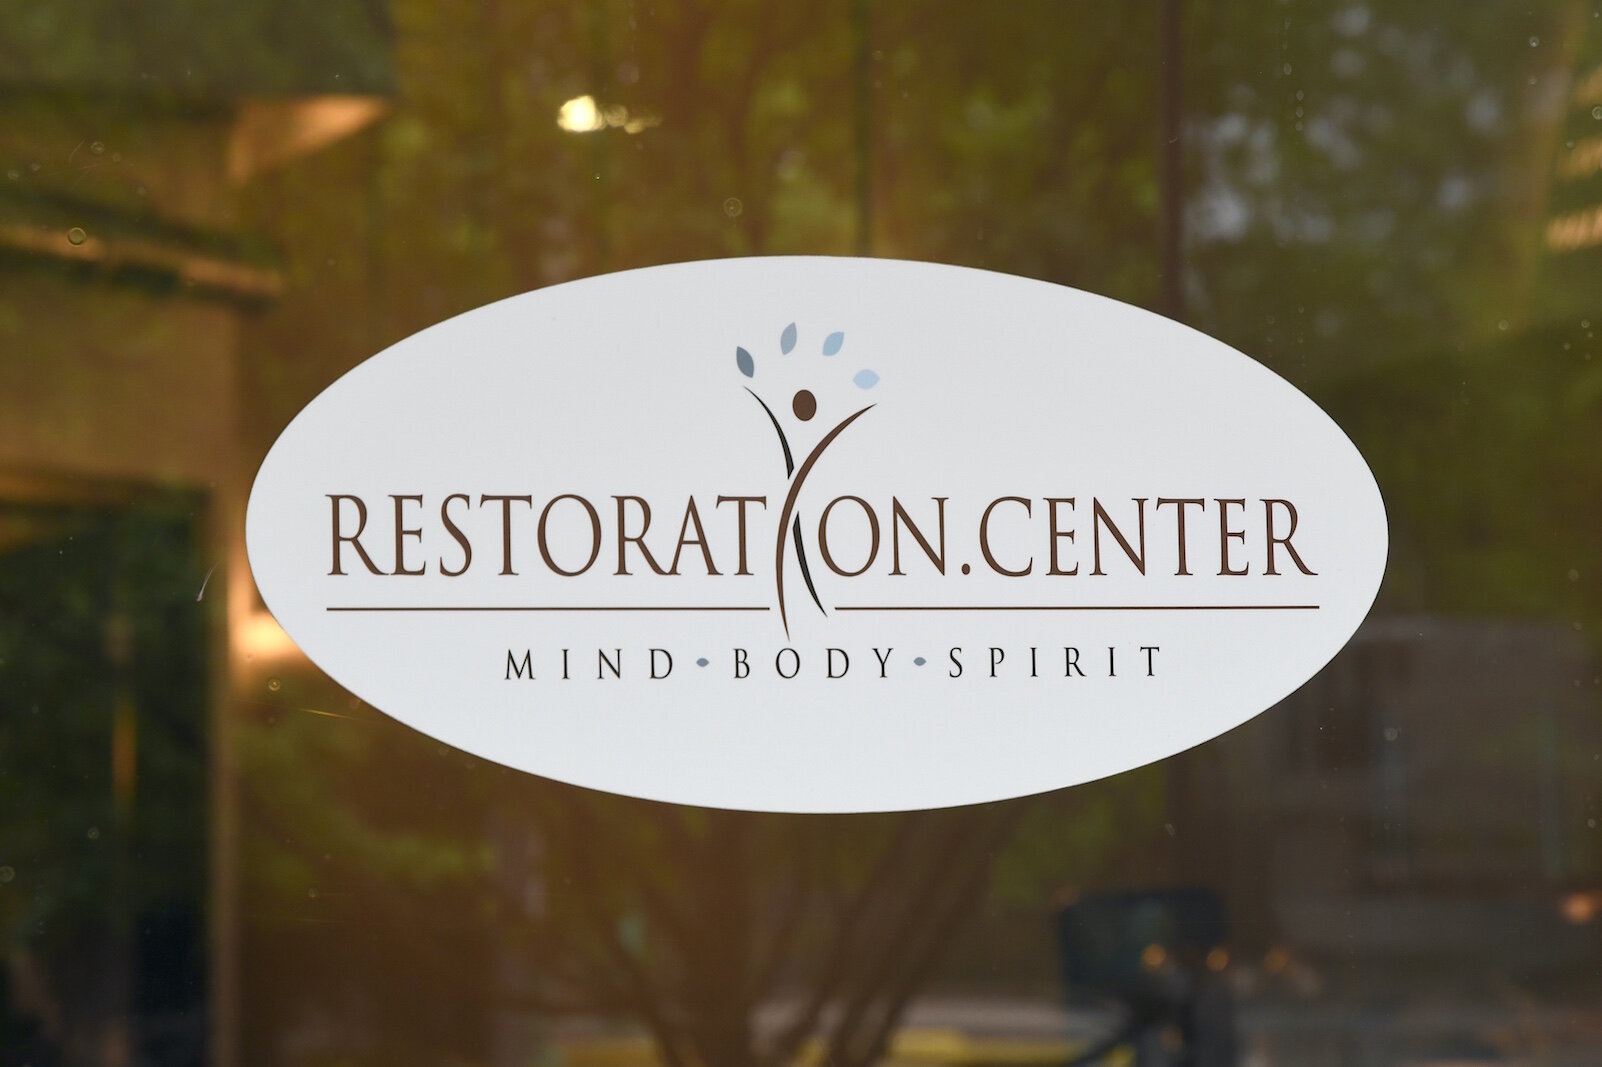 Signage of the front door of the Restoration Center.